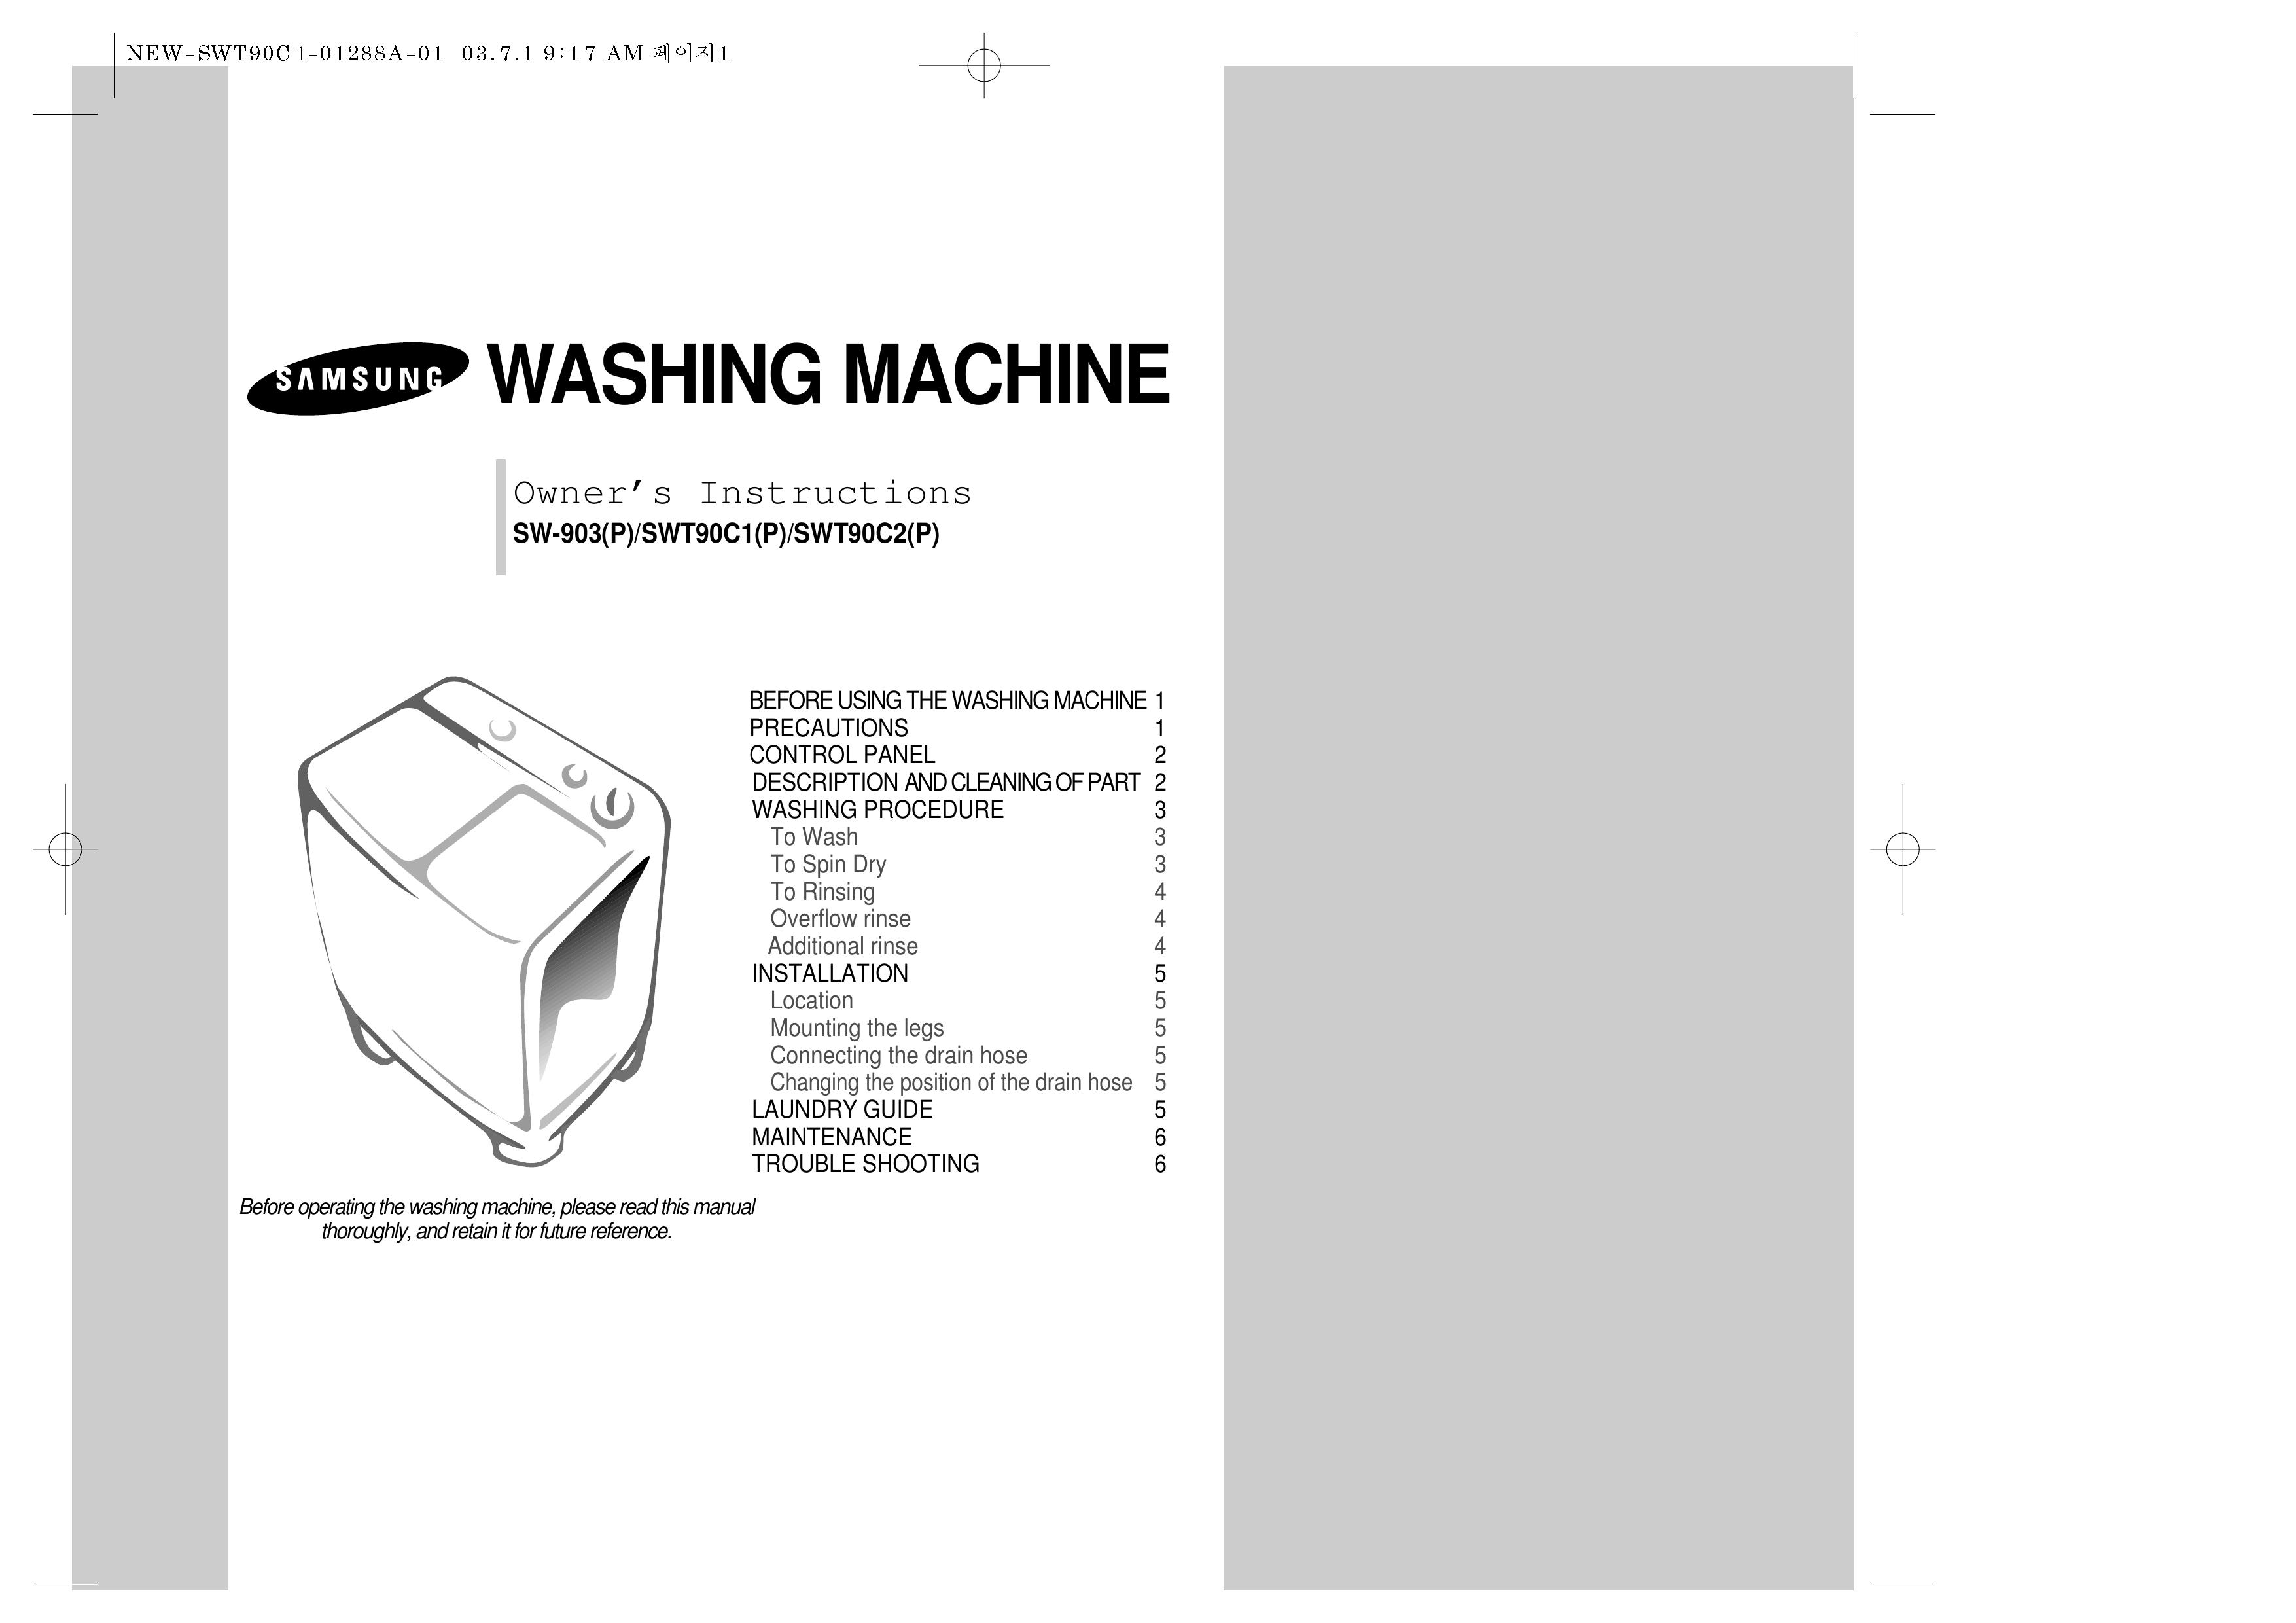 Samsung SWT90C1(P) Washer/Dryer User Manual